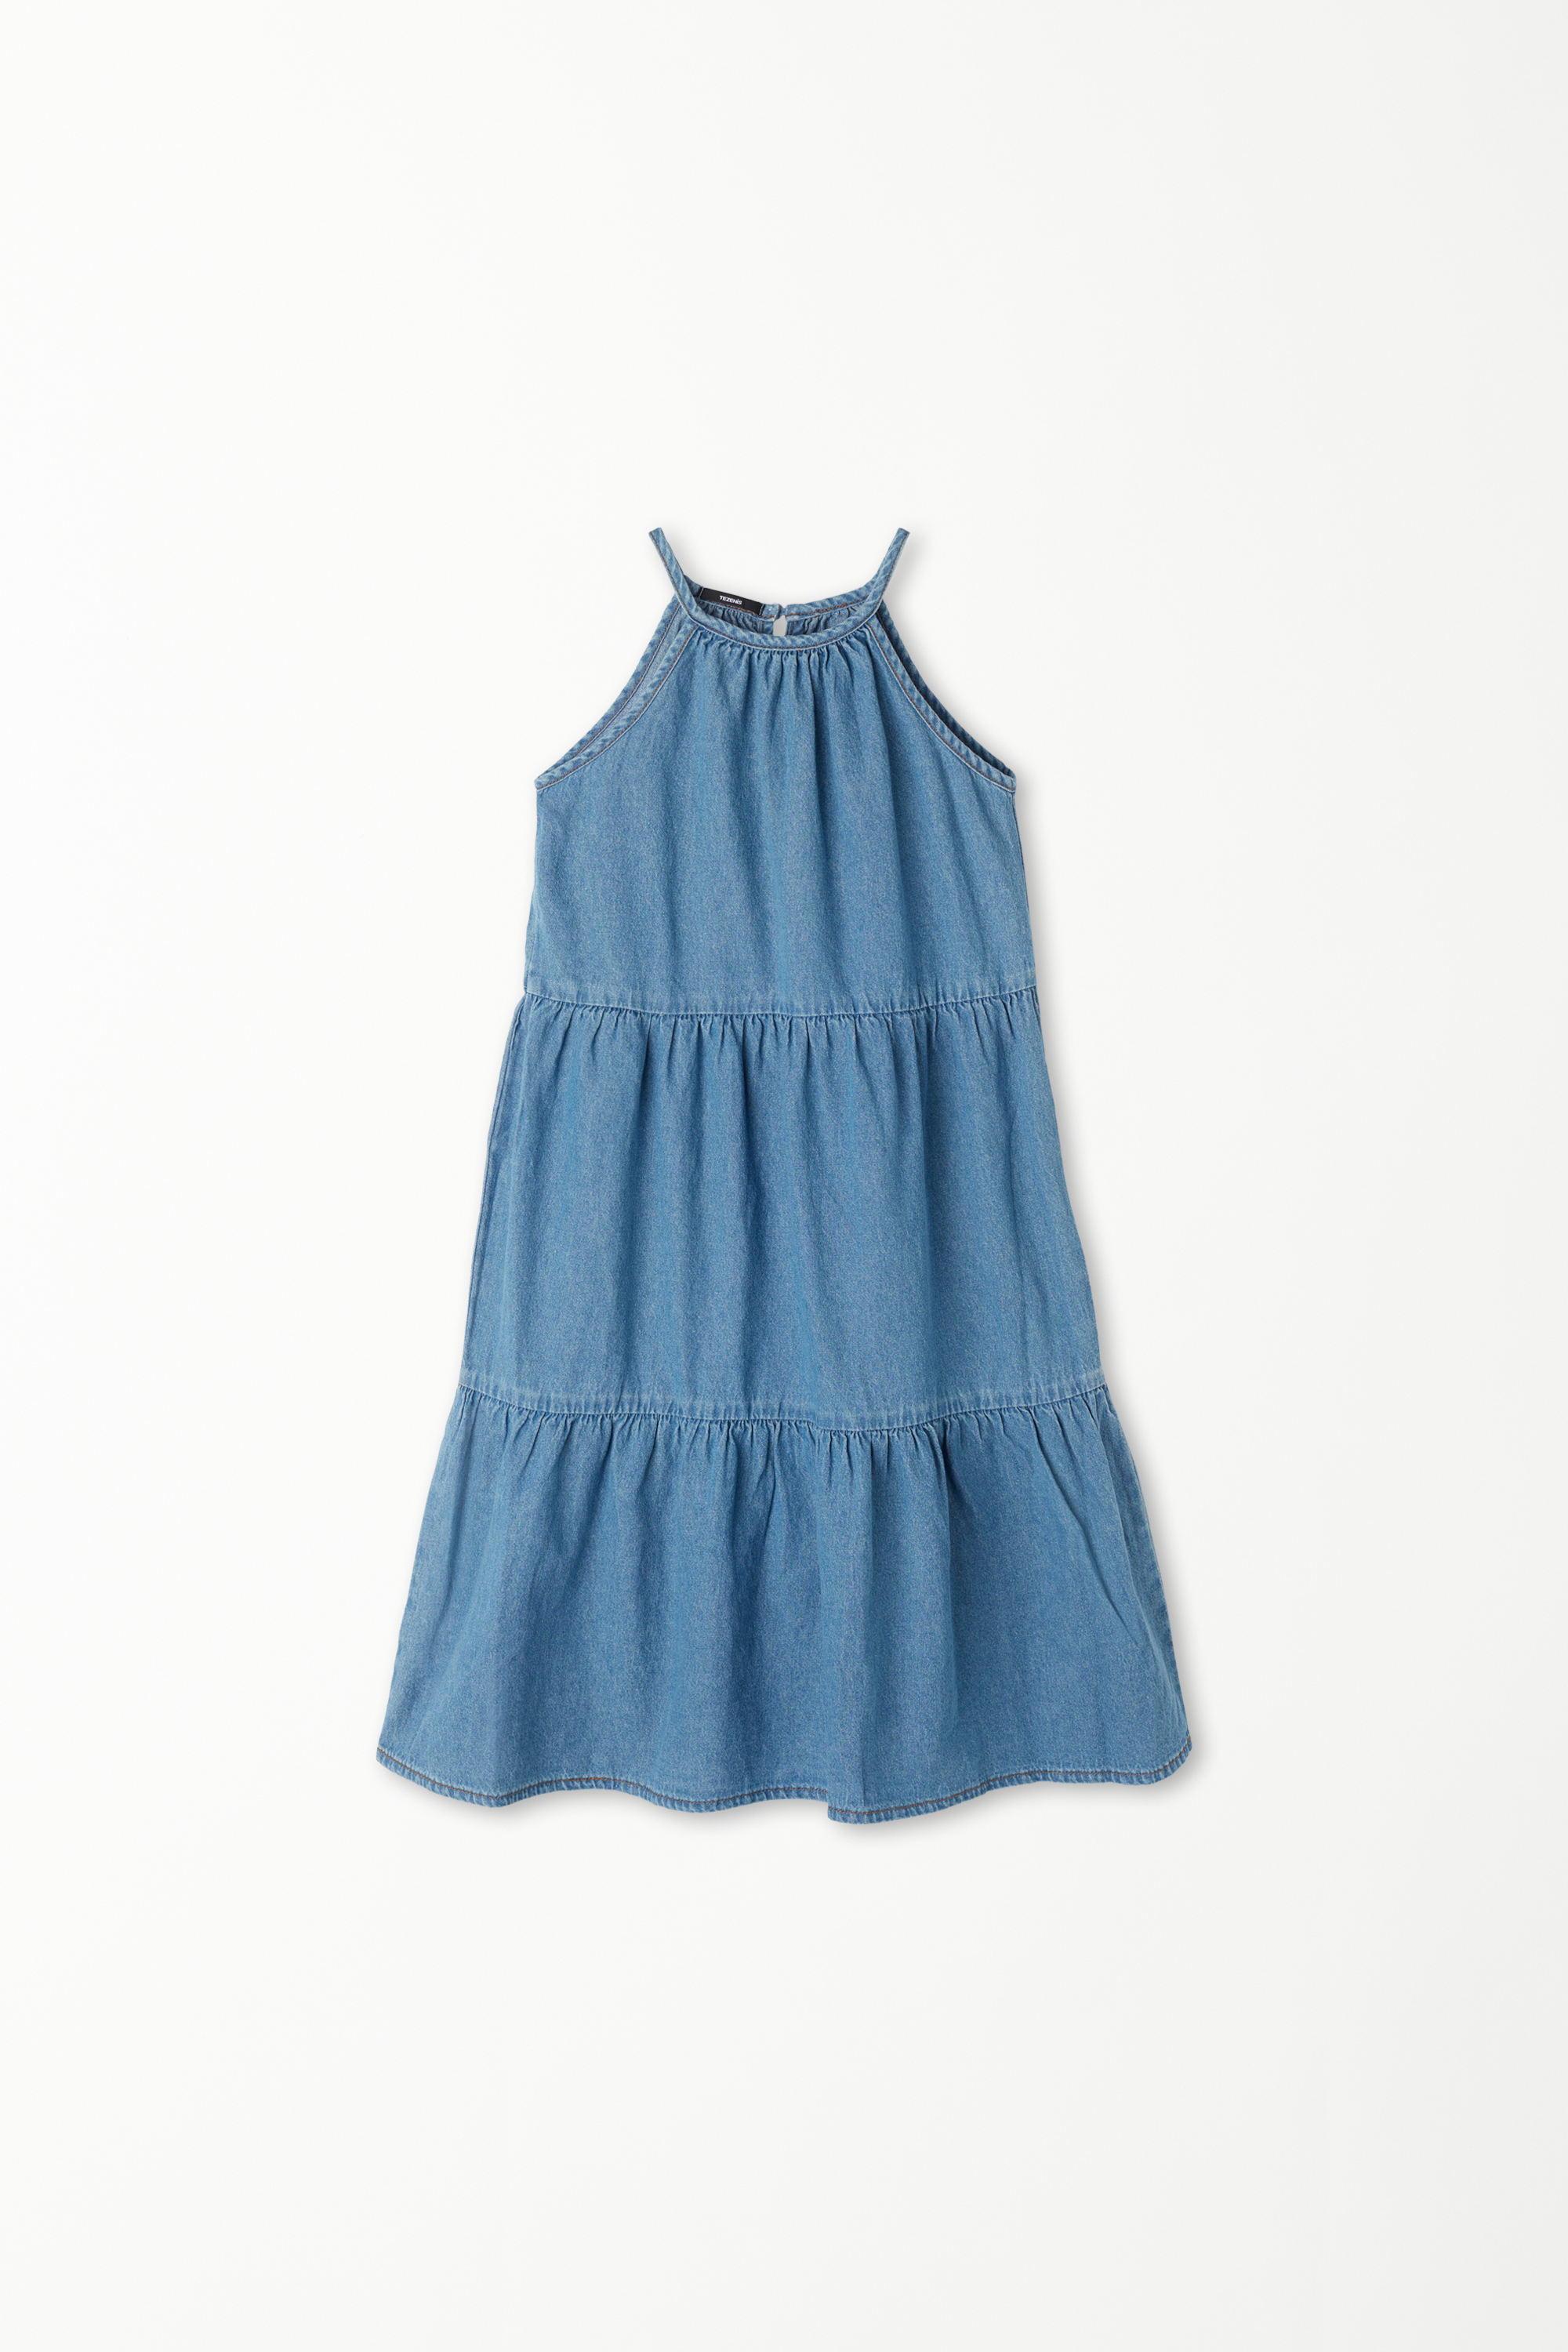 Denim Dress with Thin Shoulder Straps and Frills